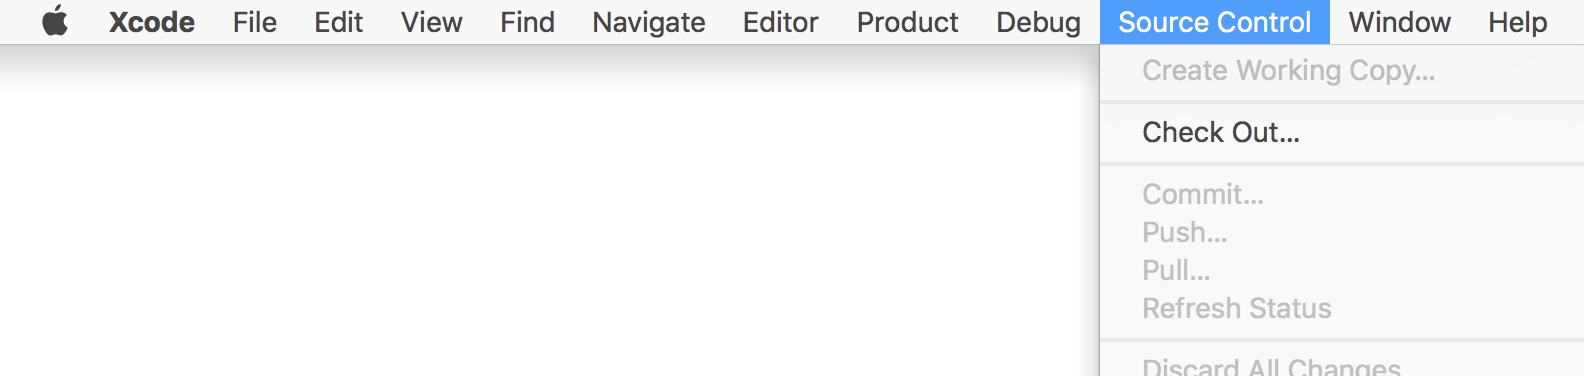 Start Xcode and go to Source Control > Check Out.